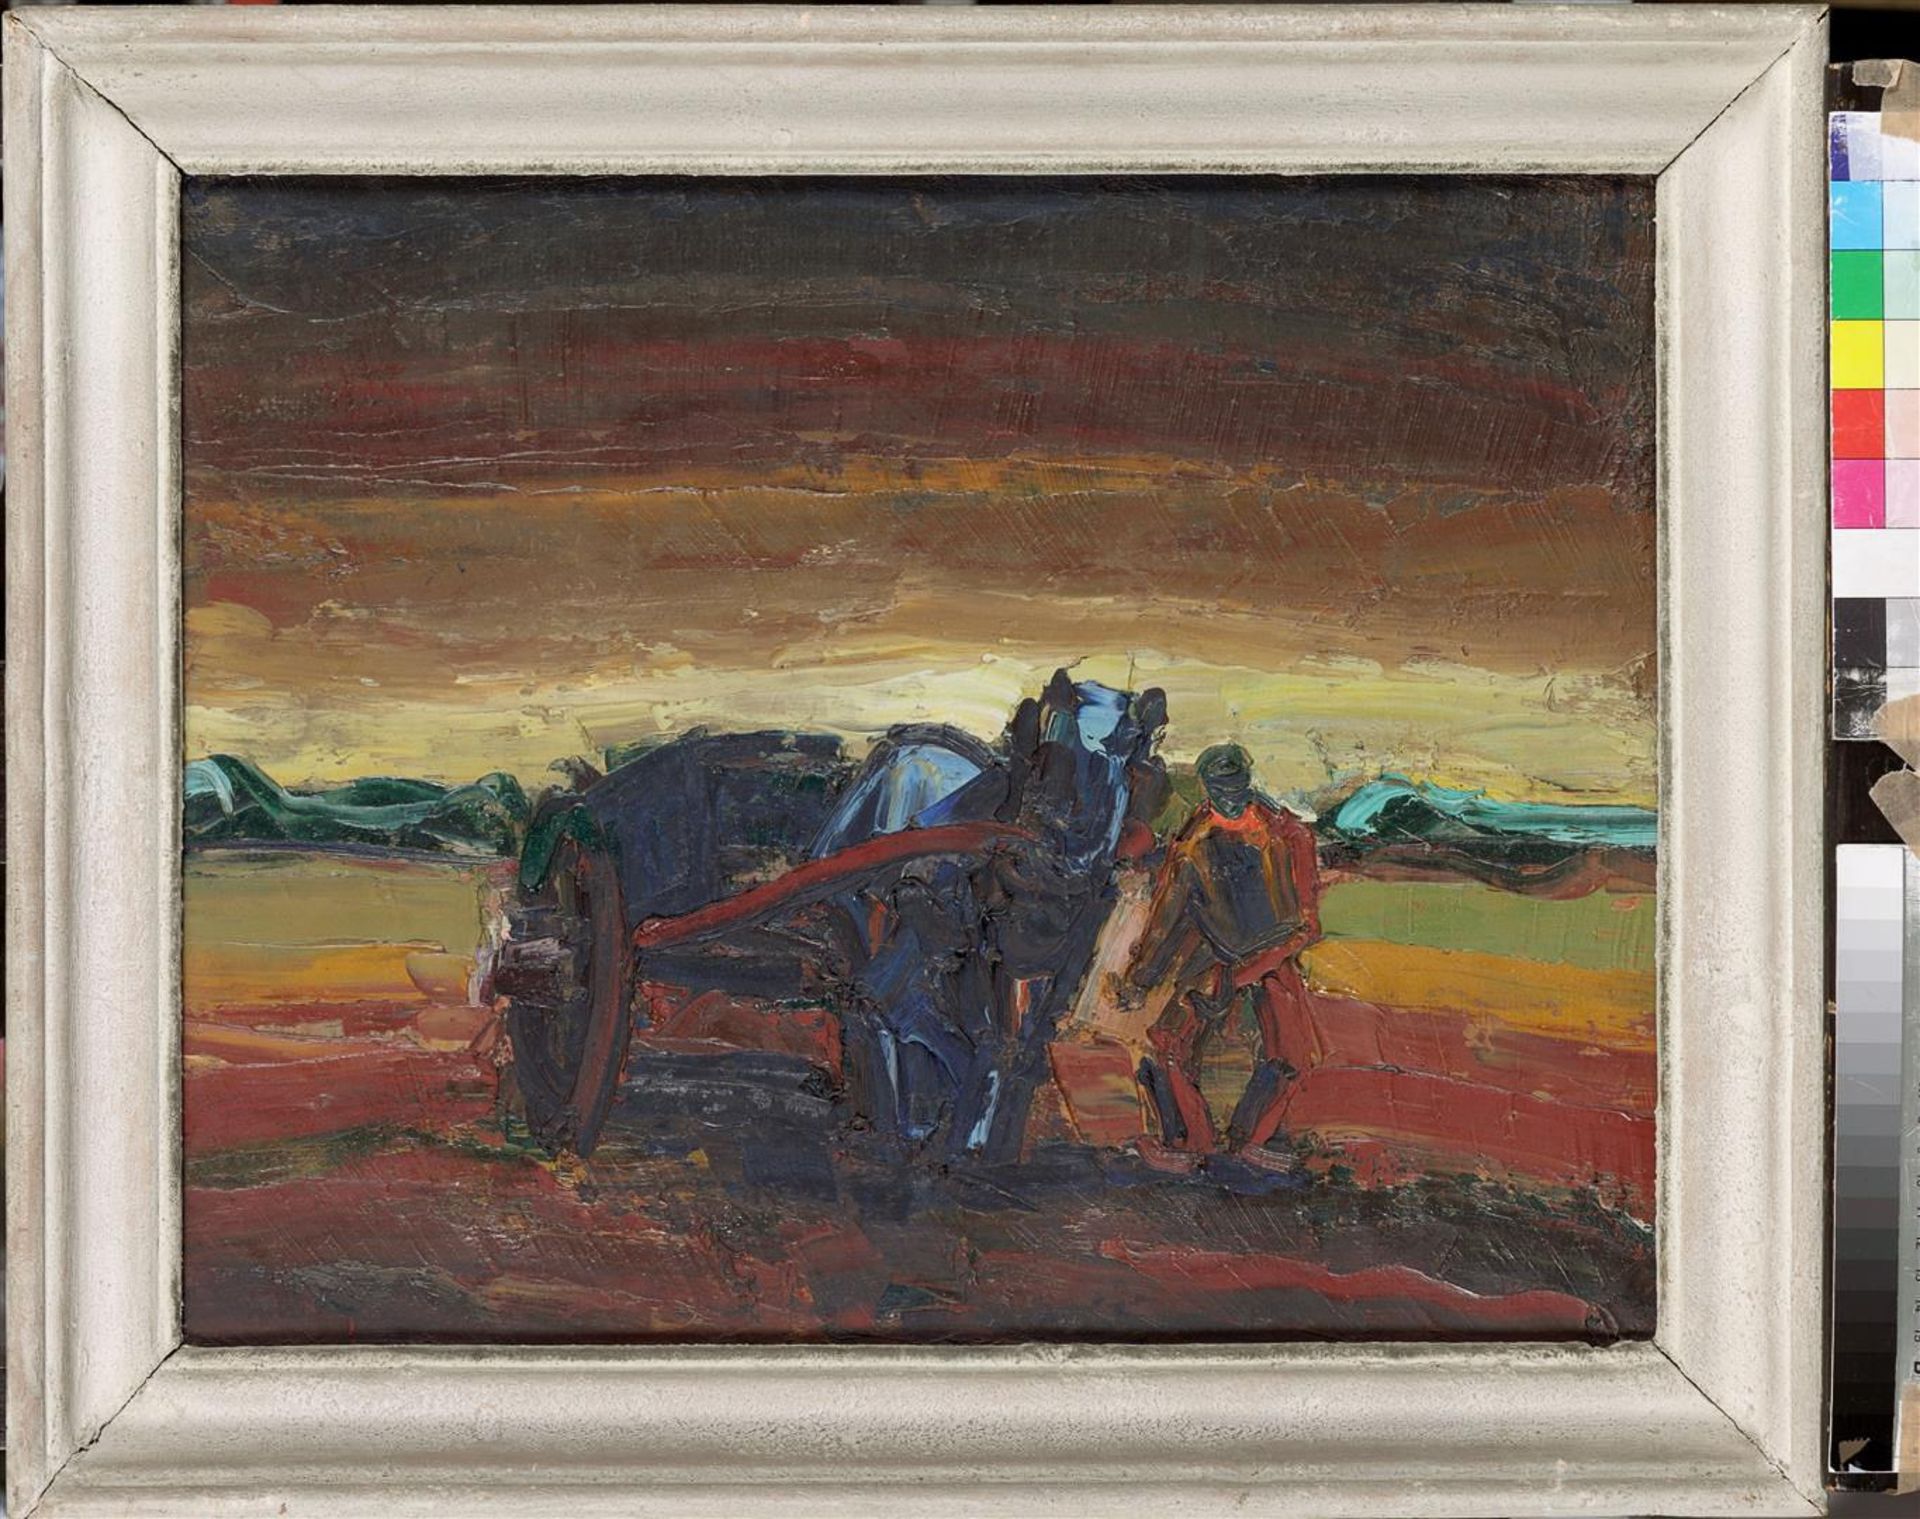 Belgian expressionist, ca. 1950 - 1960, Ploughing farmer. Signed "Reynier" (verso), oil on canvas. - Image 2 of 3